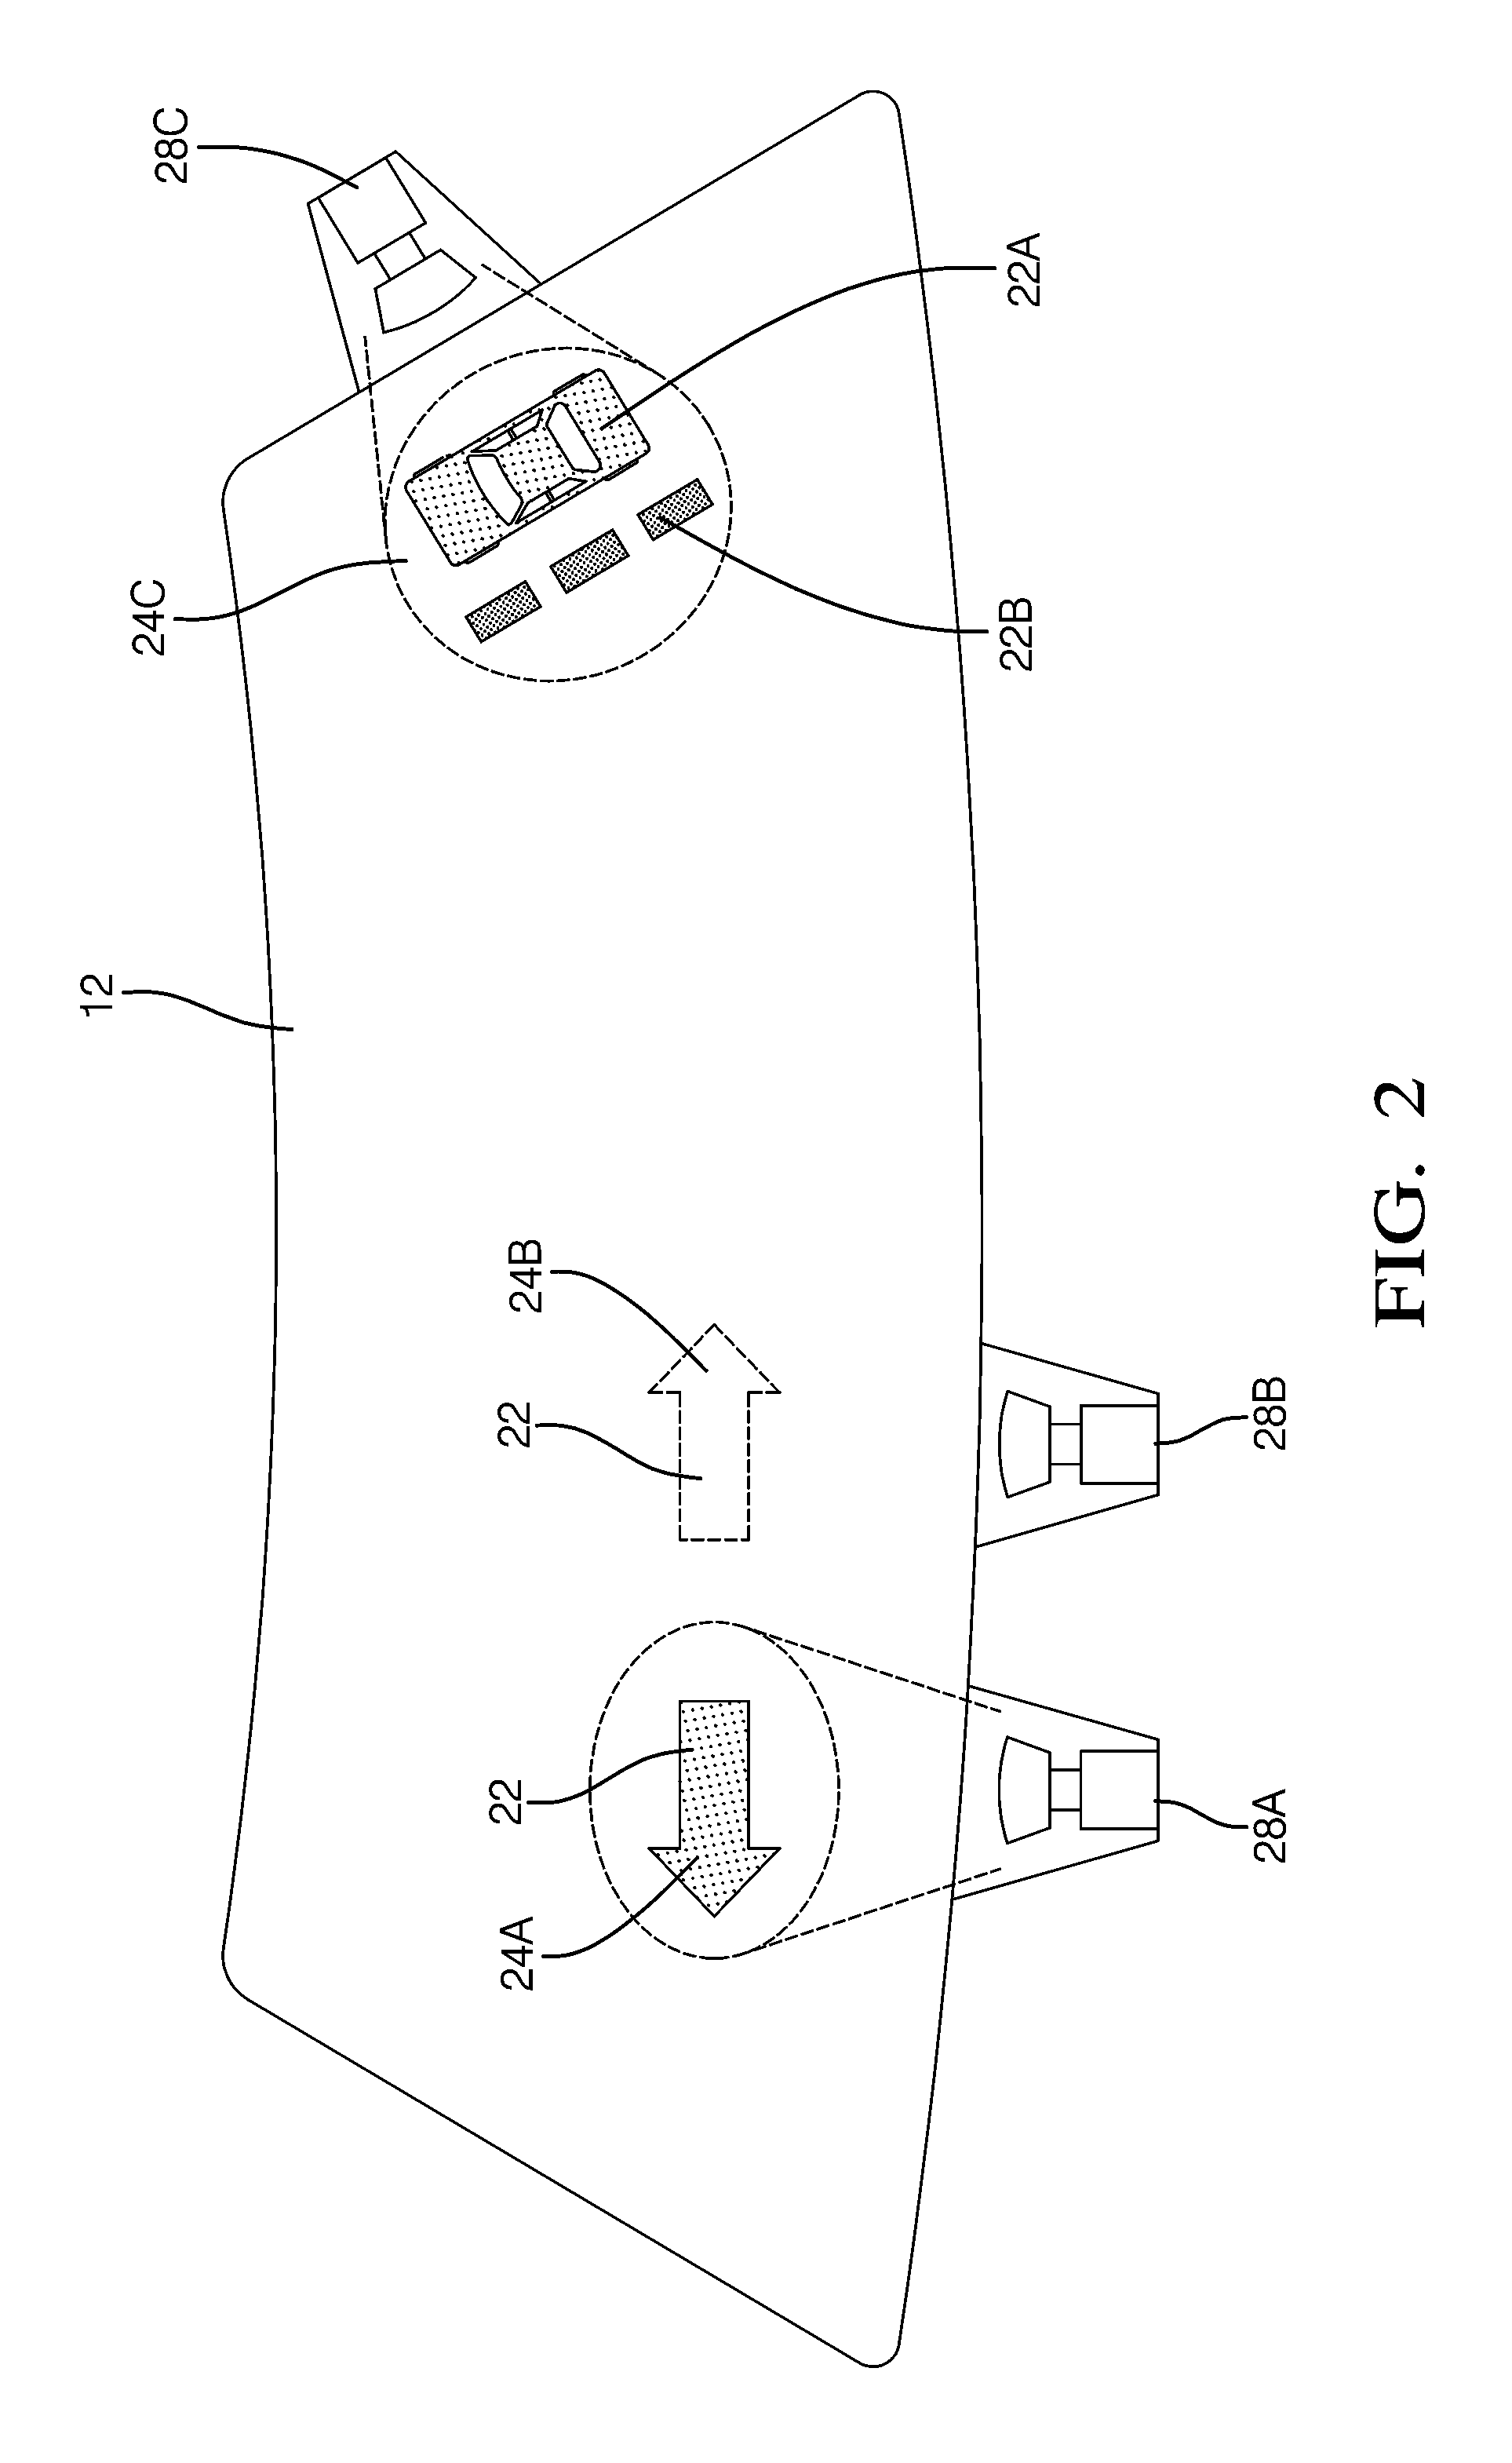 System and method of using fluorescent material to display information on a vehicle window